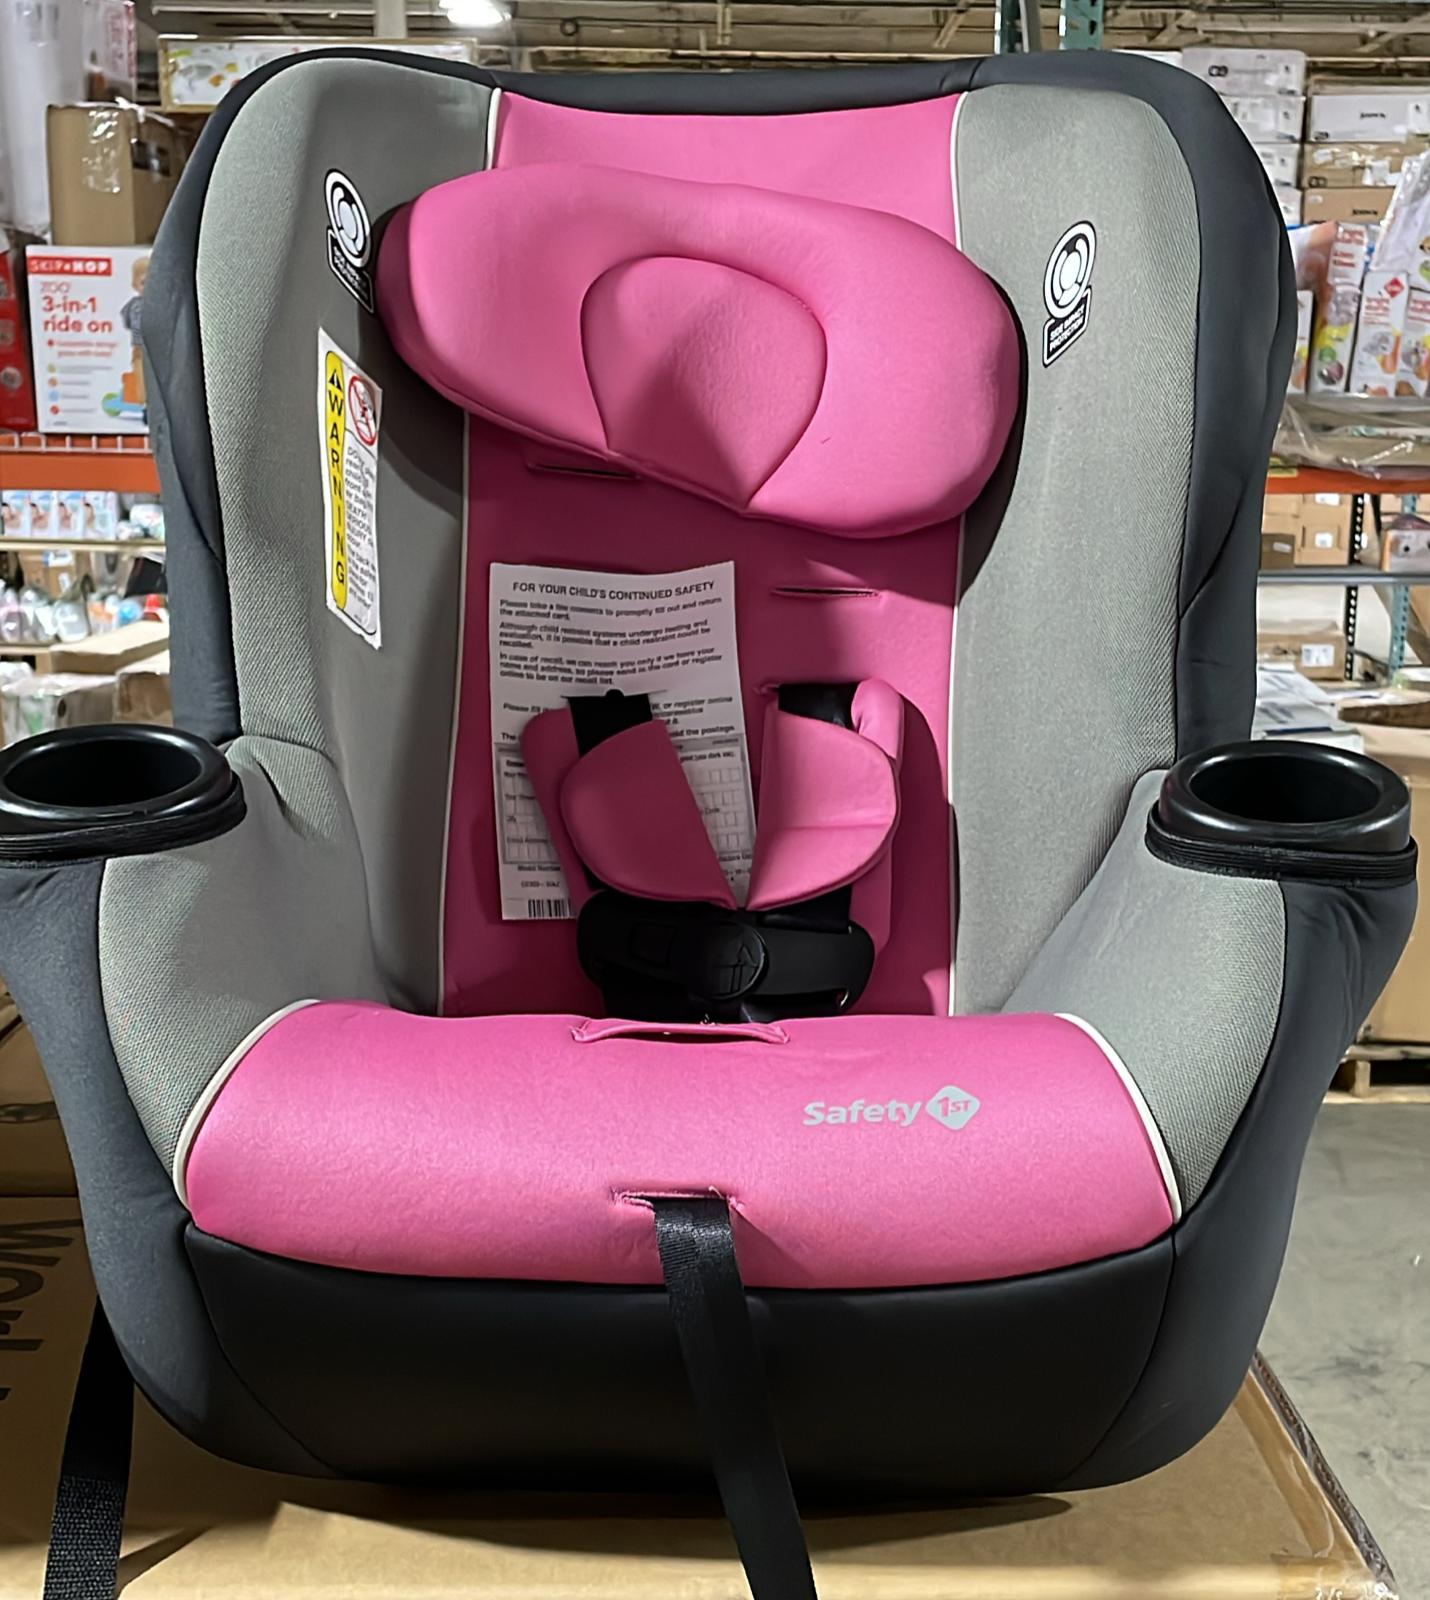 Safety 1st Getaway All-in-One Convertible Car Seat (Sitting Pretty)